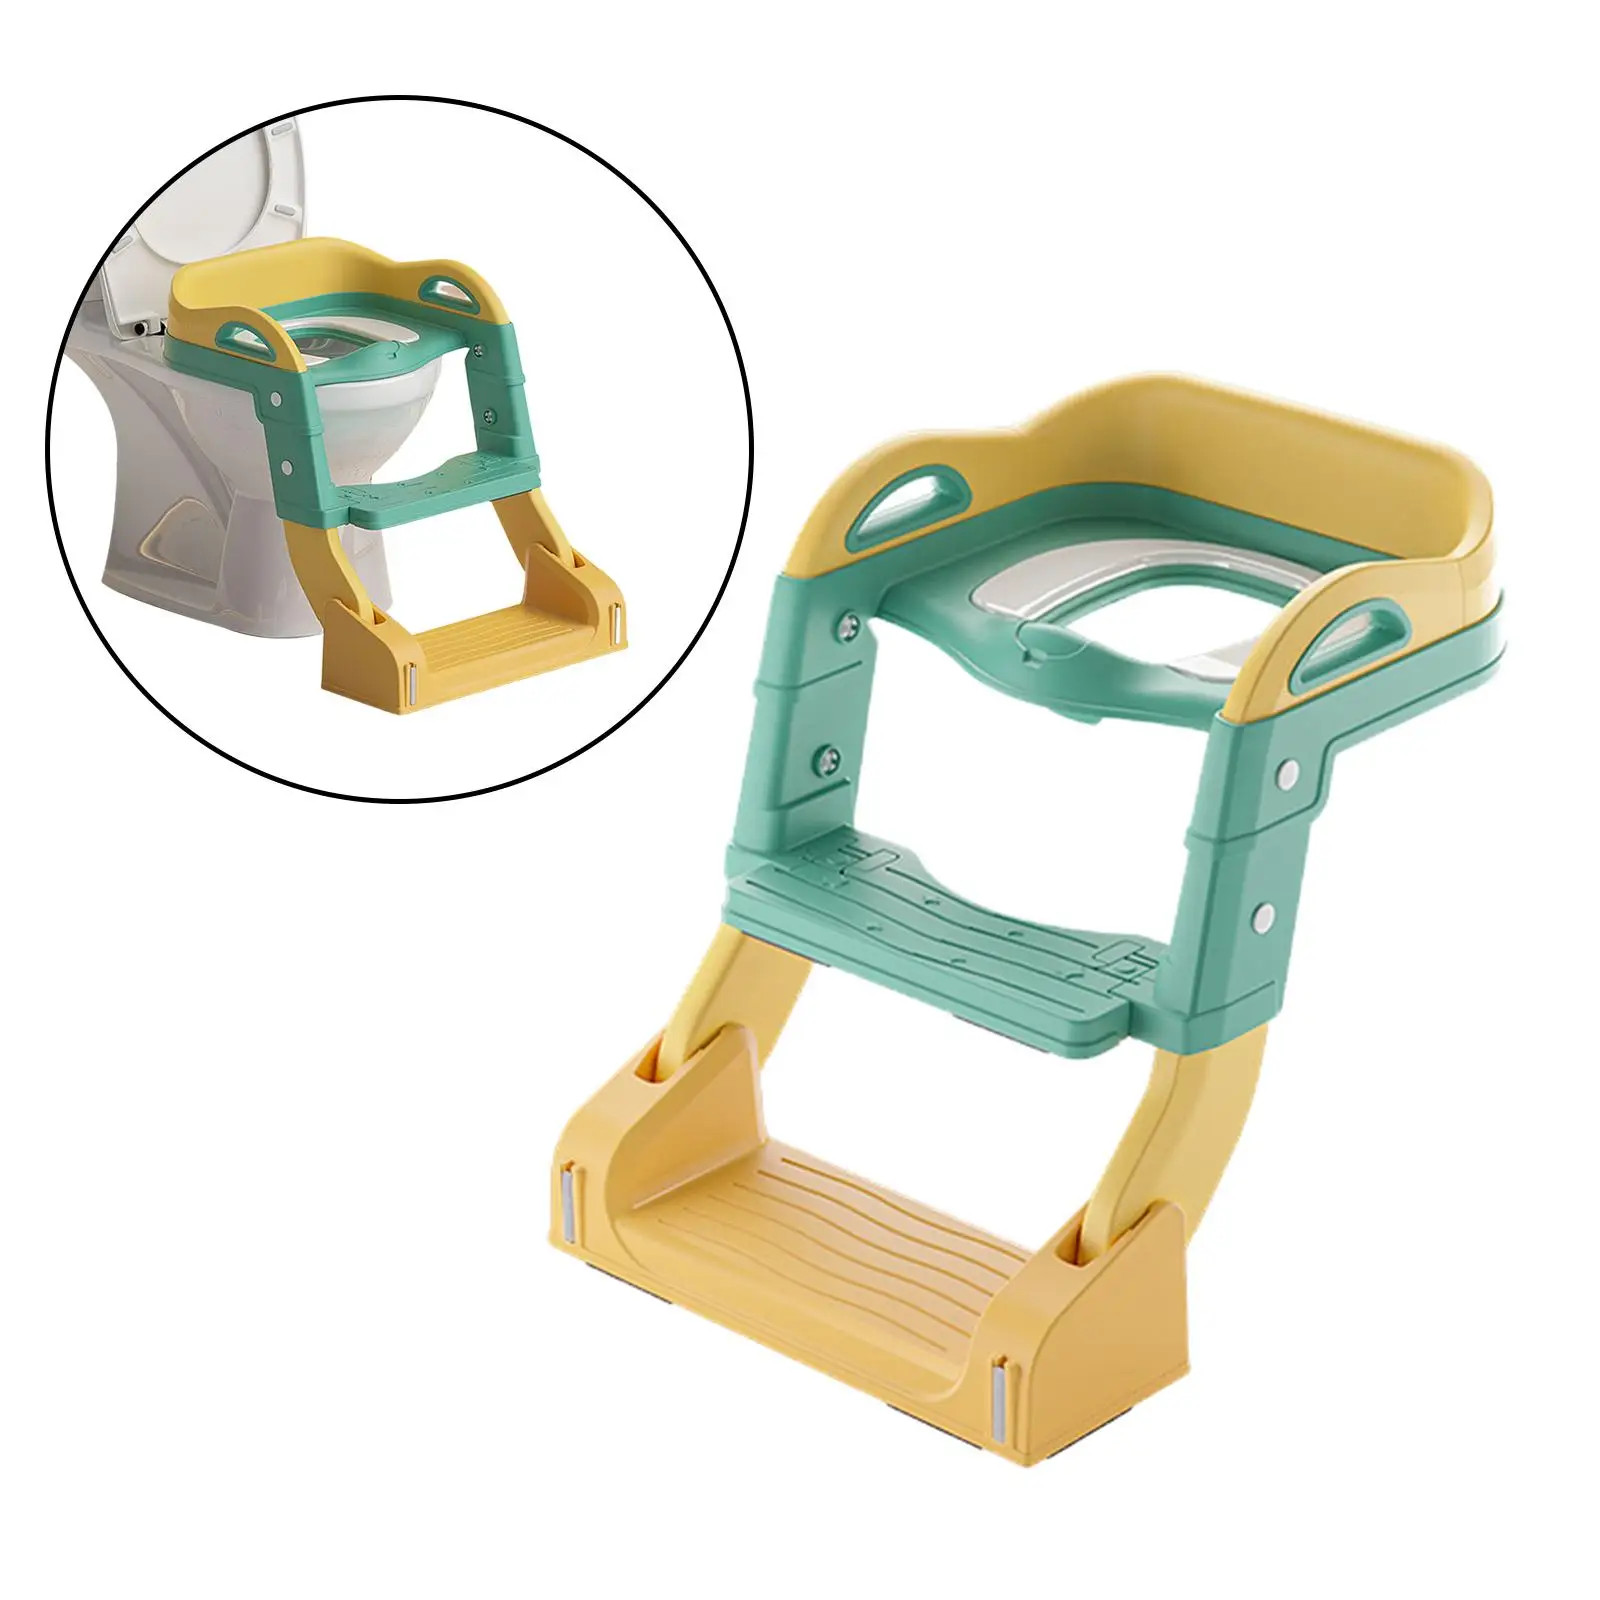 Kids Toilet Training Seat with Step up Ladder Baby Infant Potty Wide Steps Soft Cushion Non Slip Portable Toilet Trainer Seat